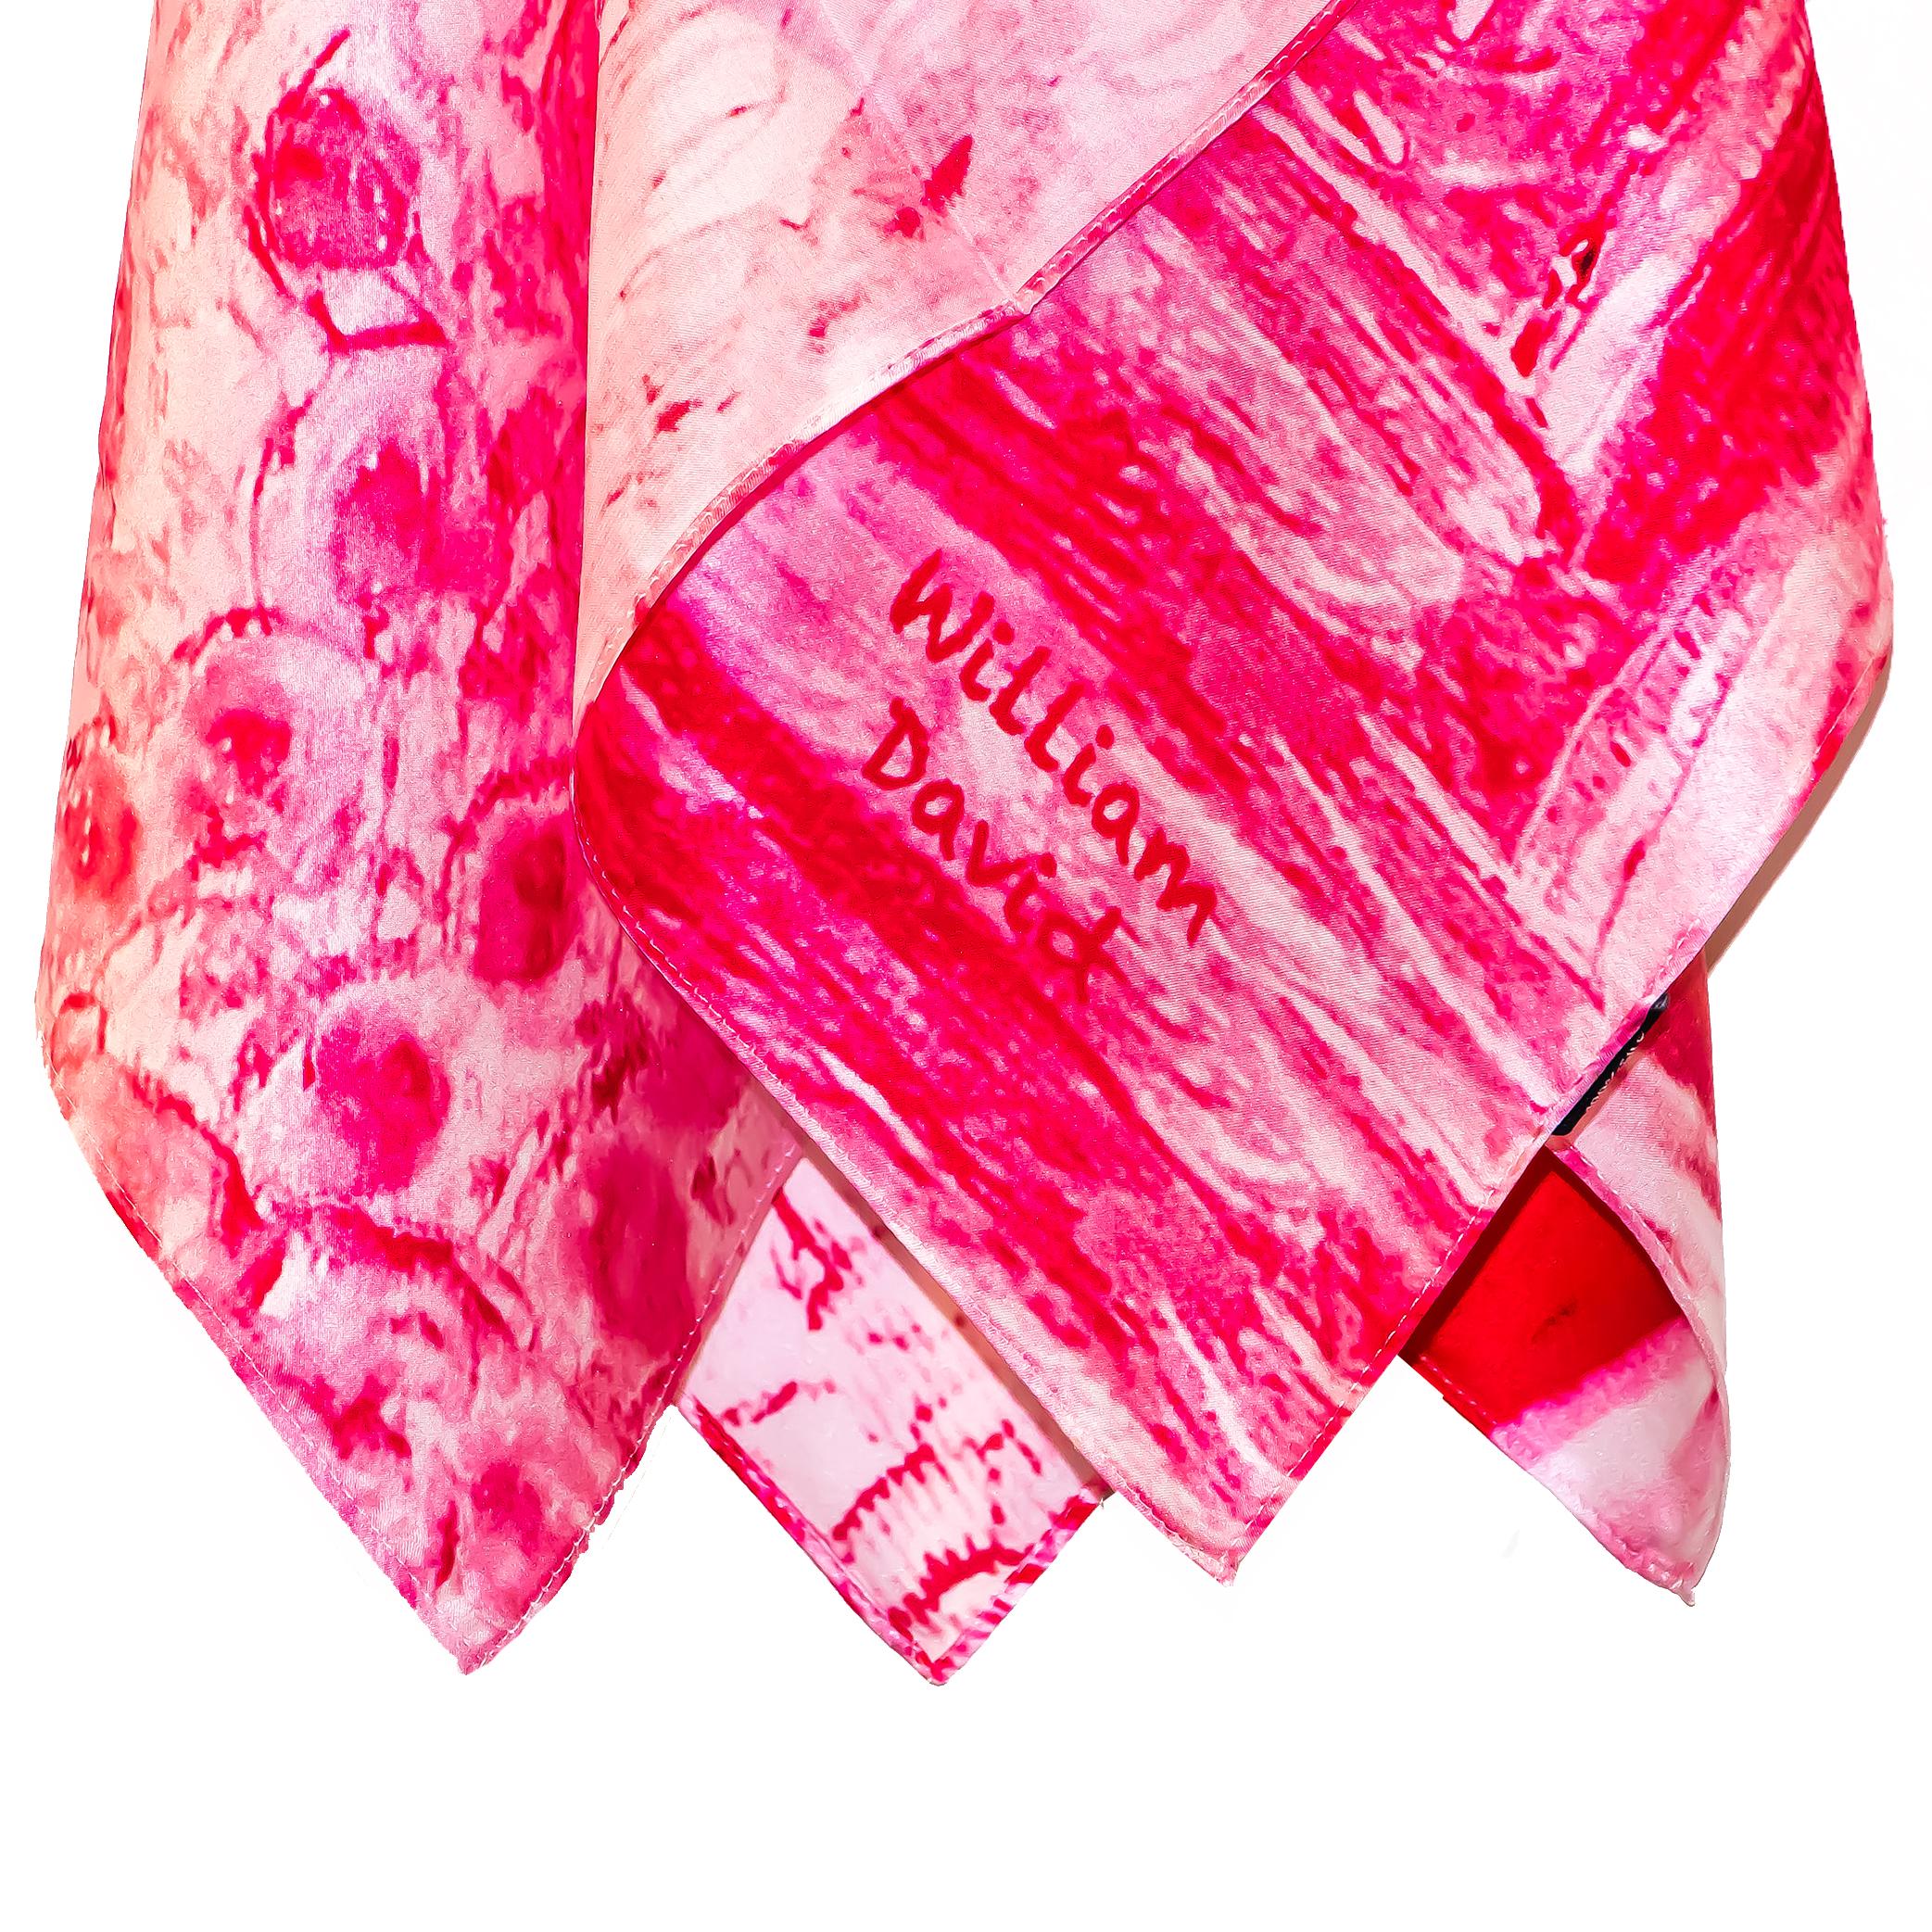 William David Limited Edition Silk Scarf Pink In New Condition For Sale In Carlsbad, CA